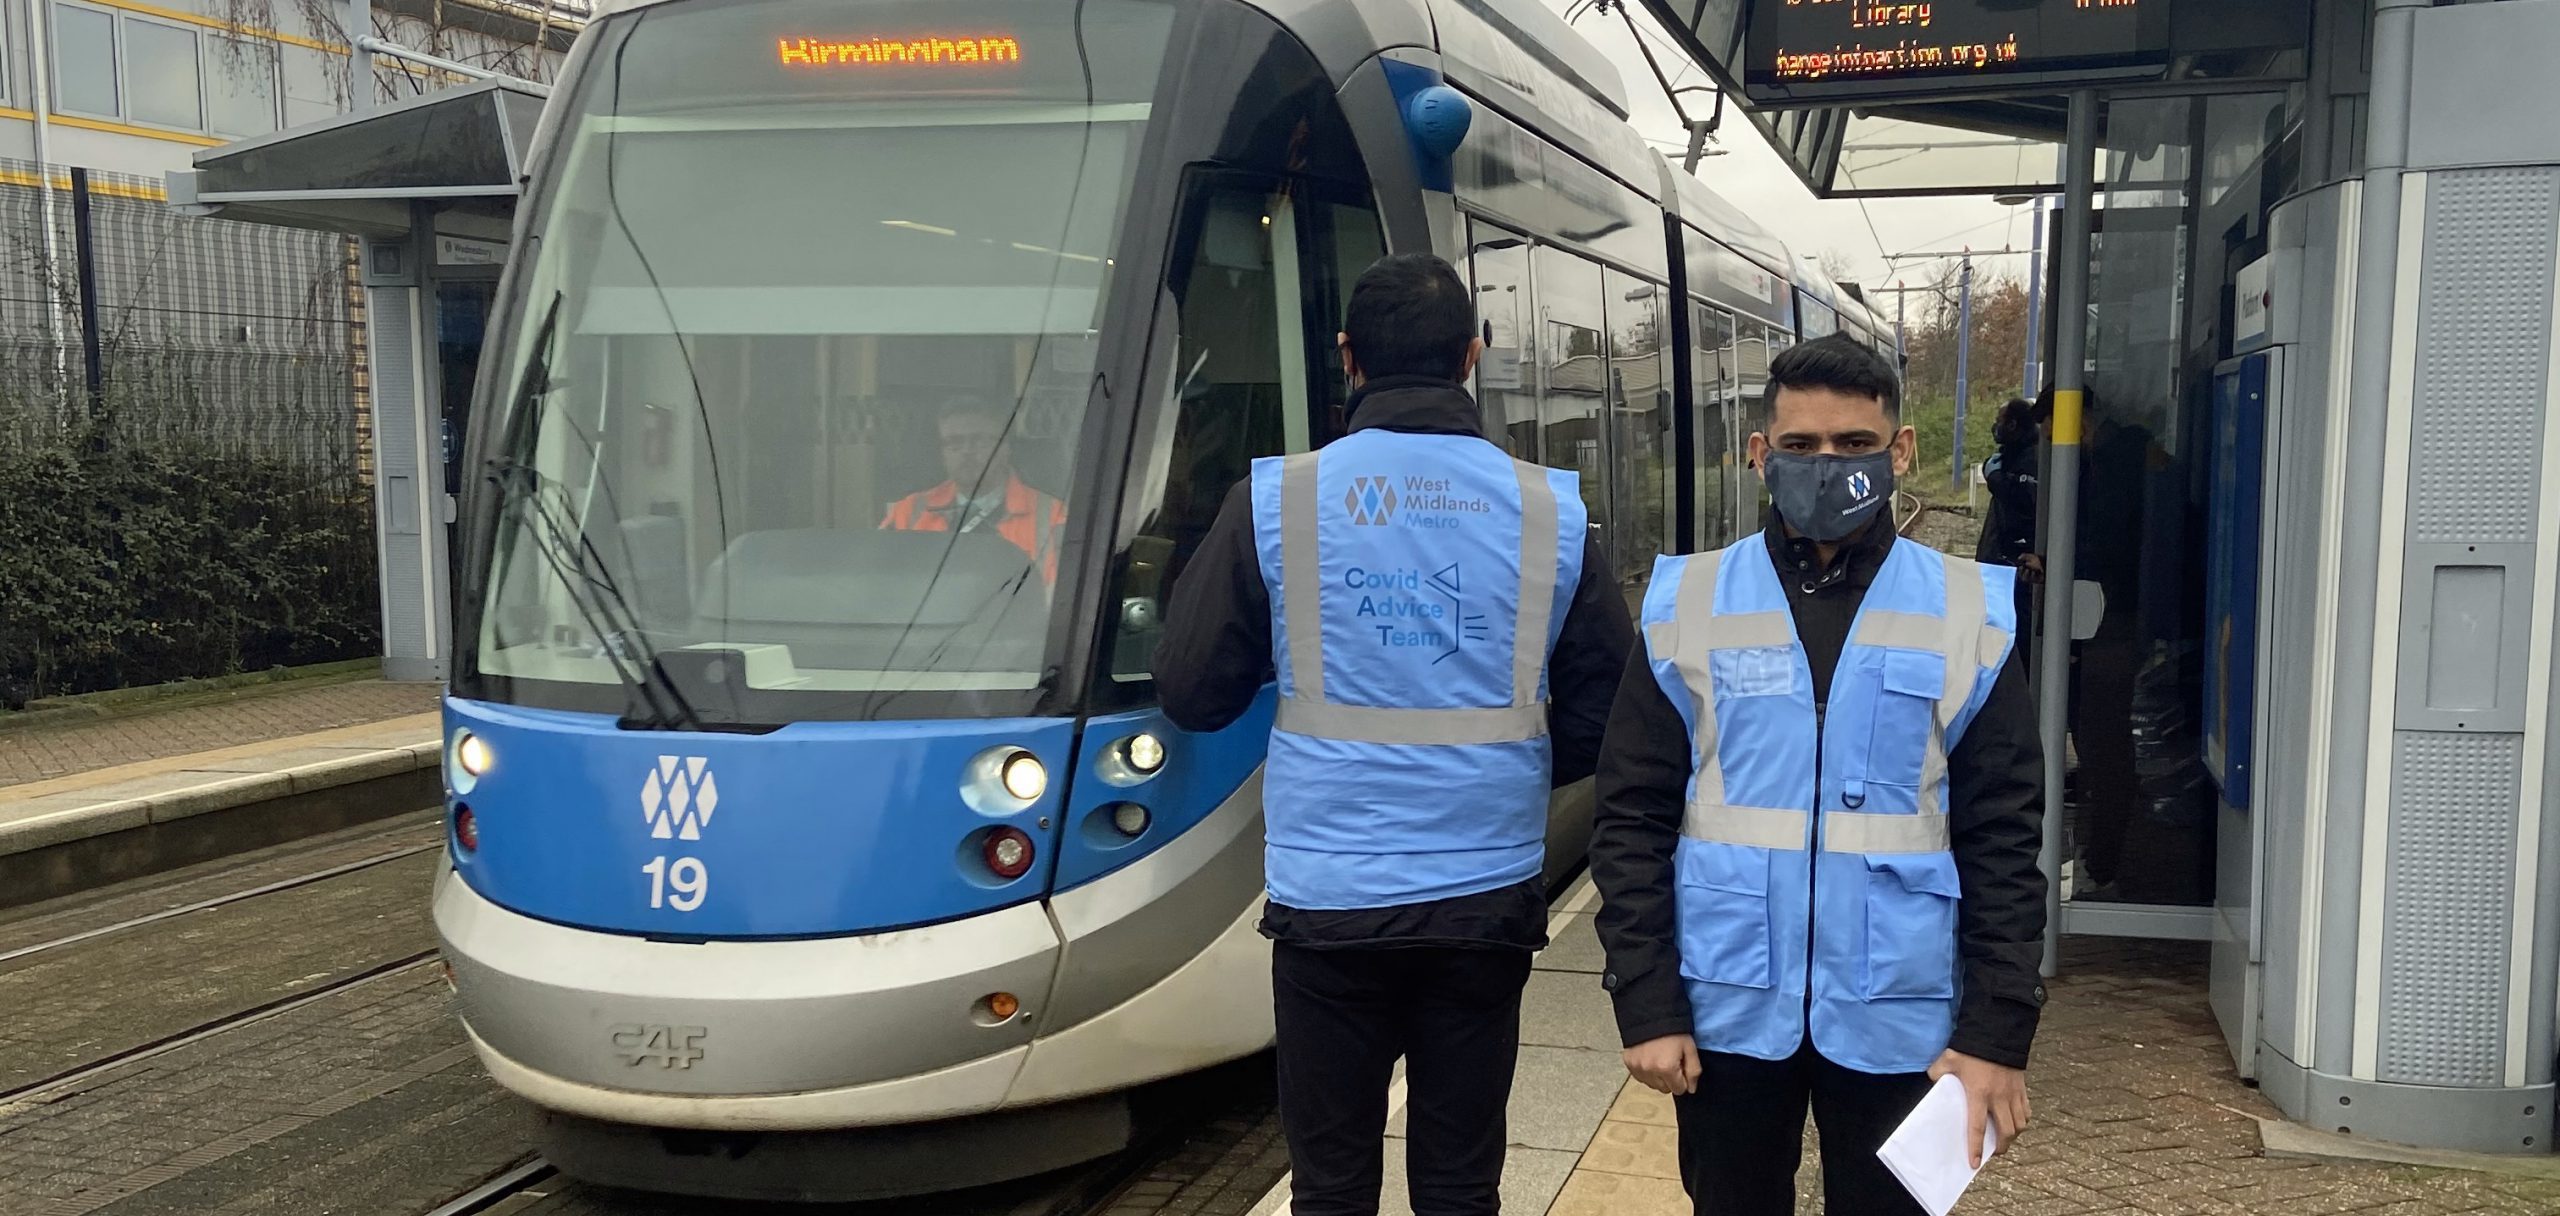 Image of tram with two men in high vis standing on platform next to it - One man is facing the tram, one is facing the camera wearing a face mask